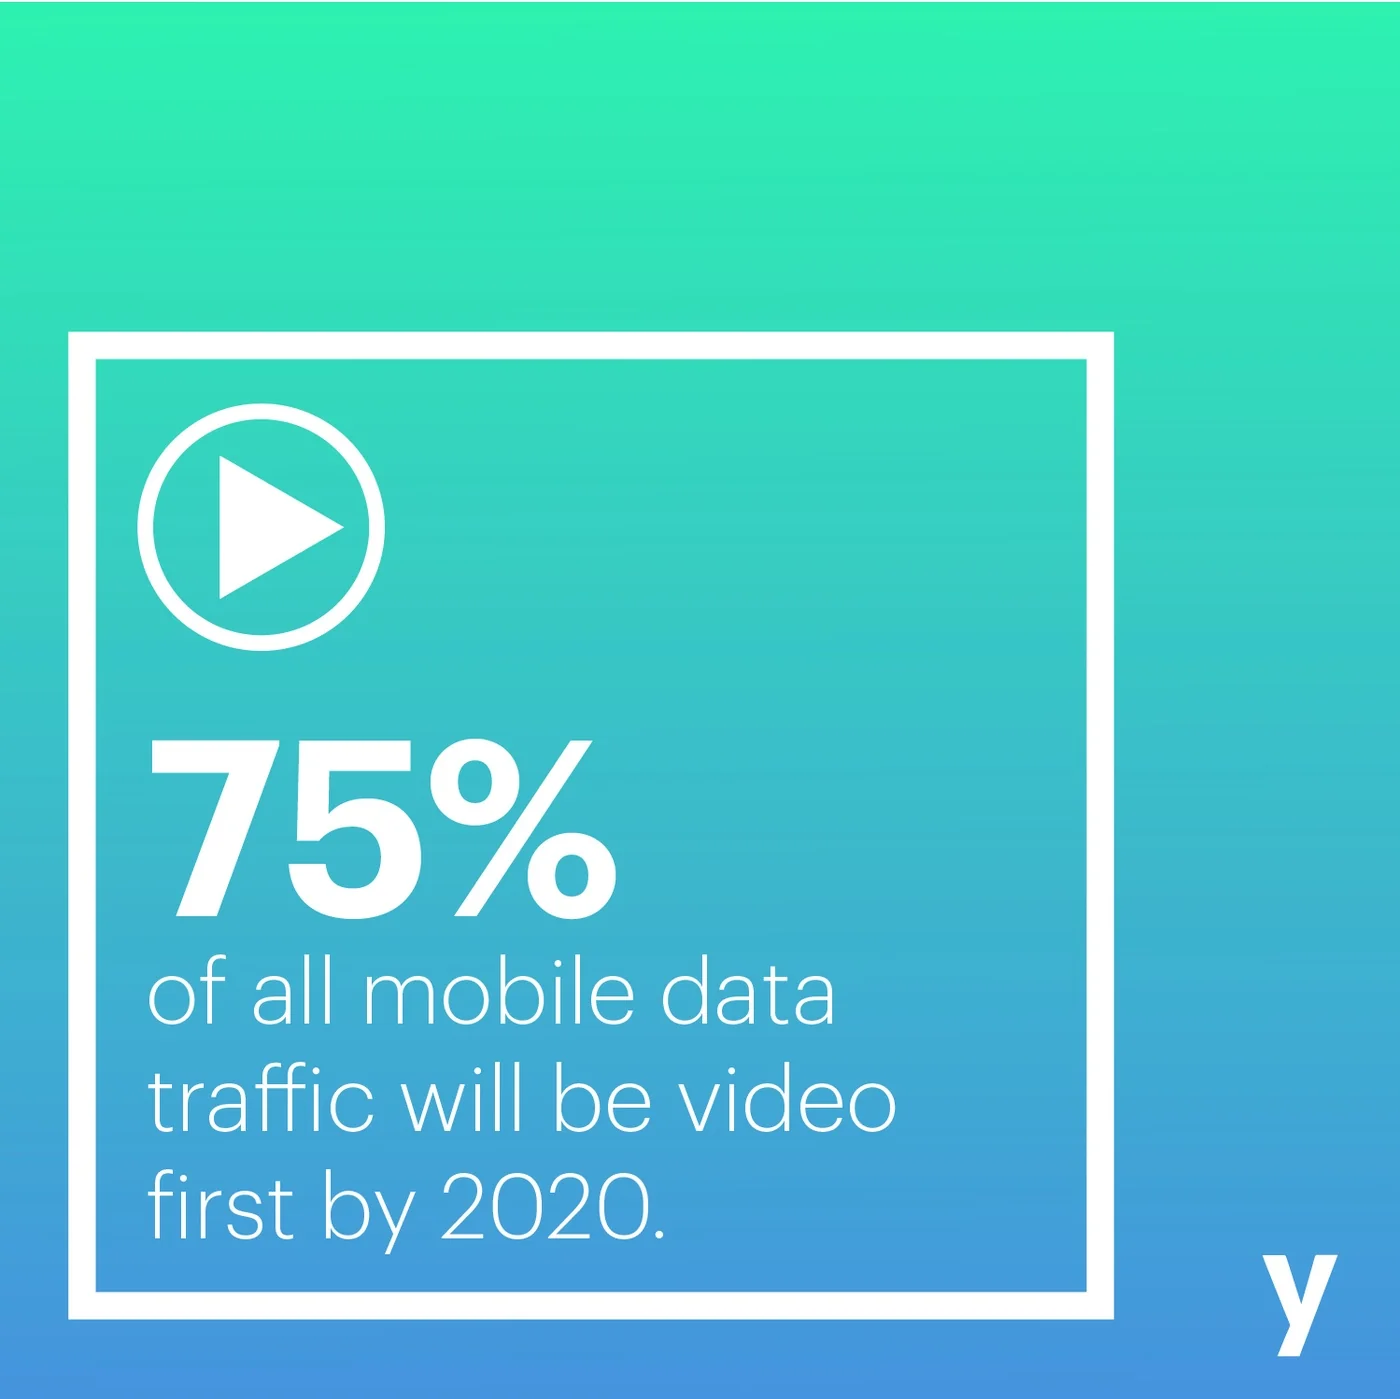 75% of mobile data traffic will be video by 2020.